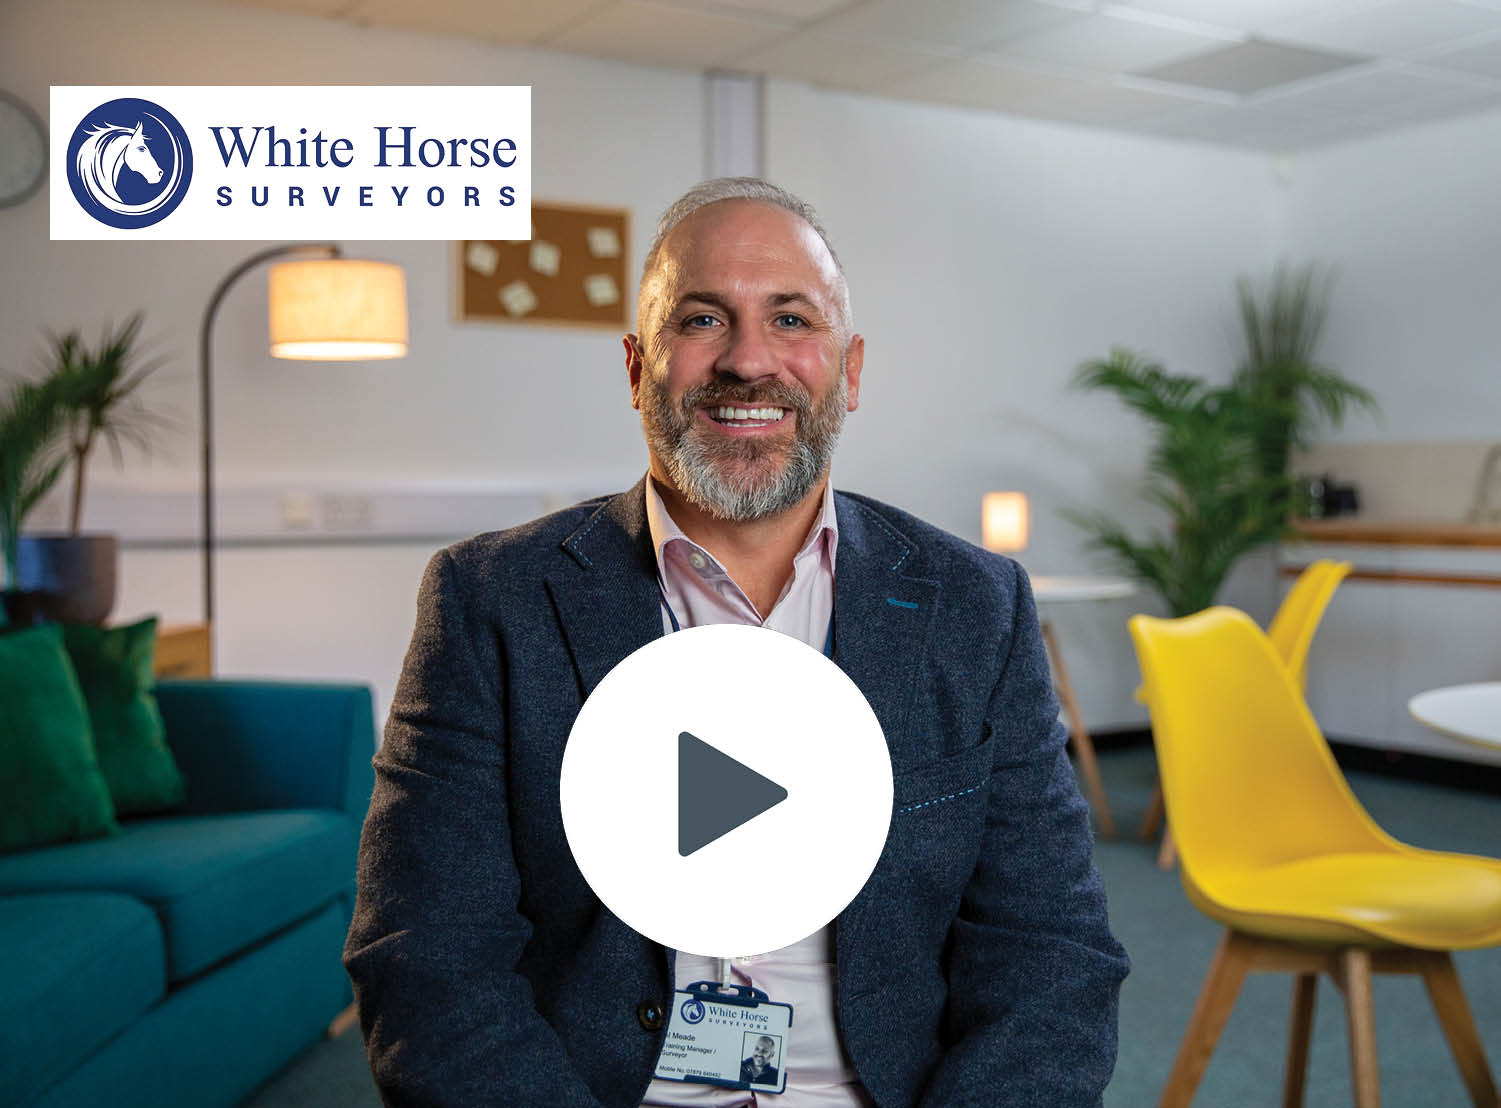 White Horse Surveyors share how their use of GoReport & Survey Booker has helped enhance their business success and customer experience.